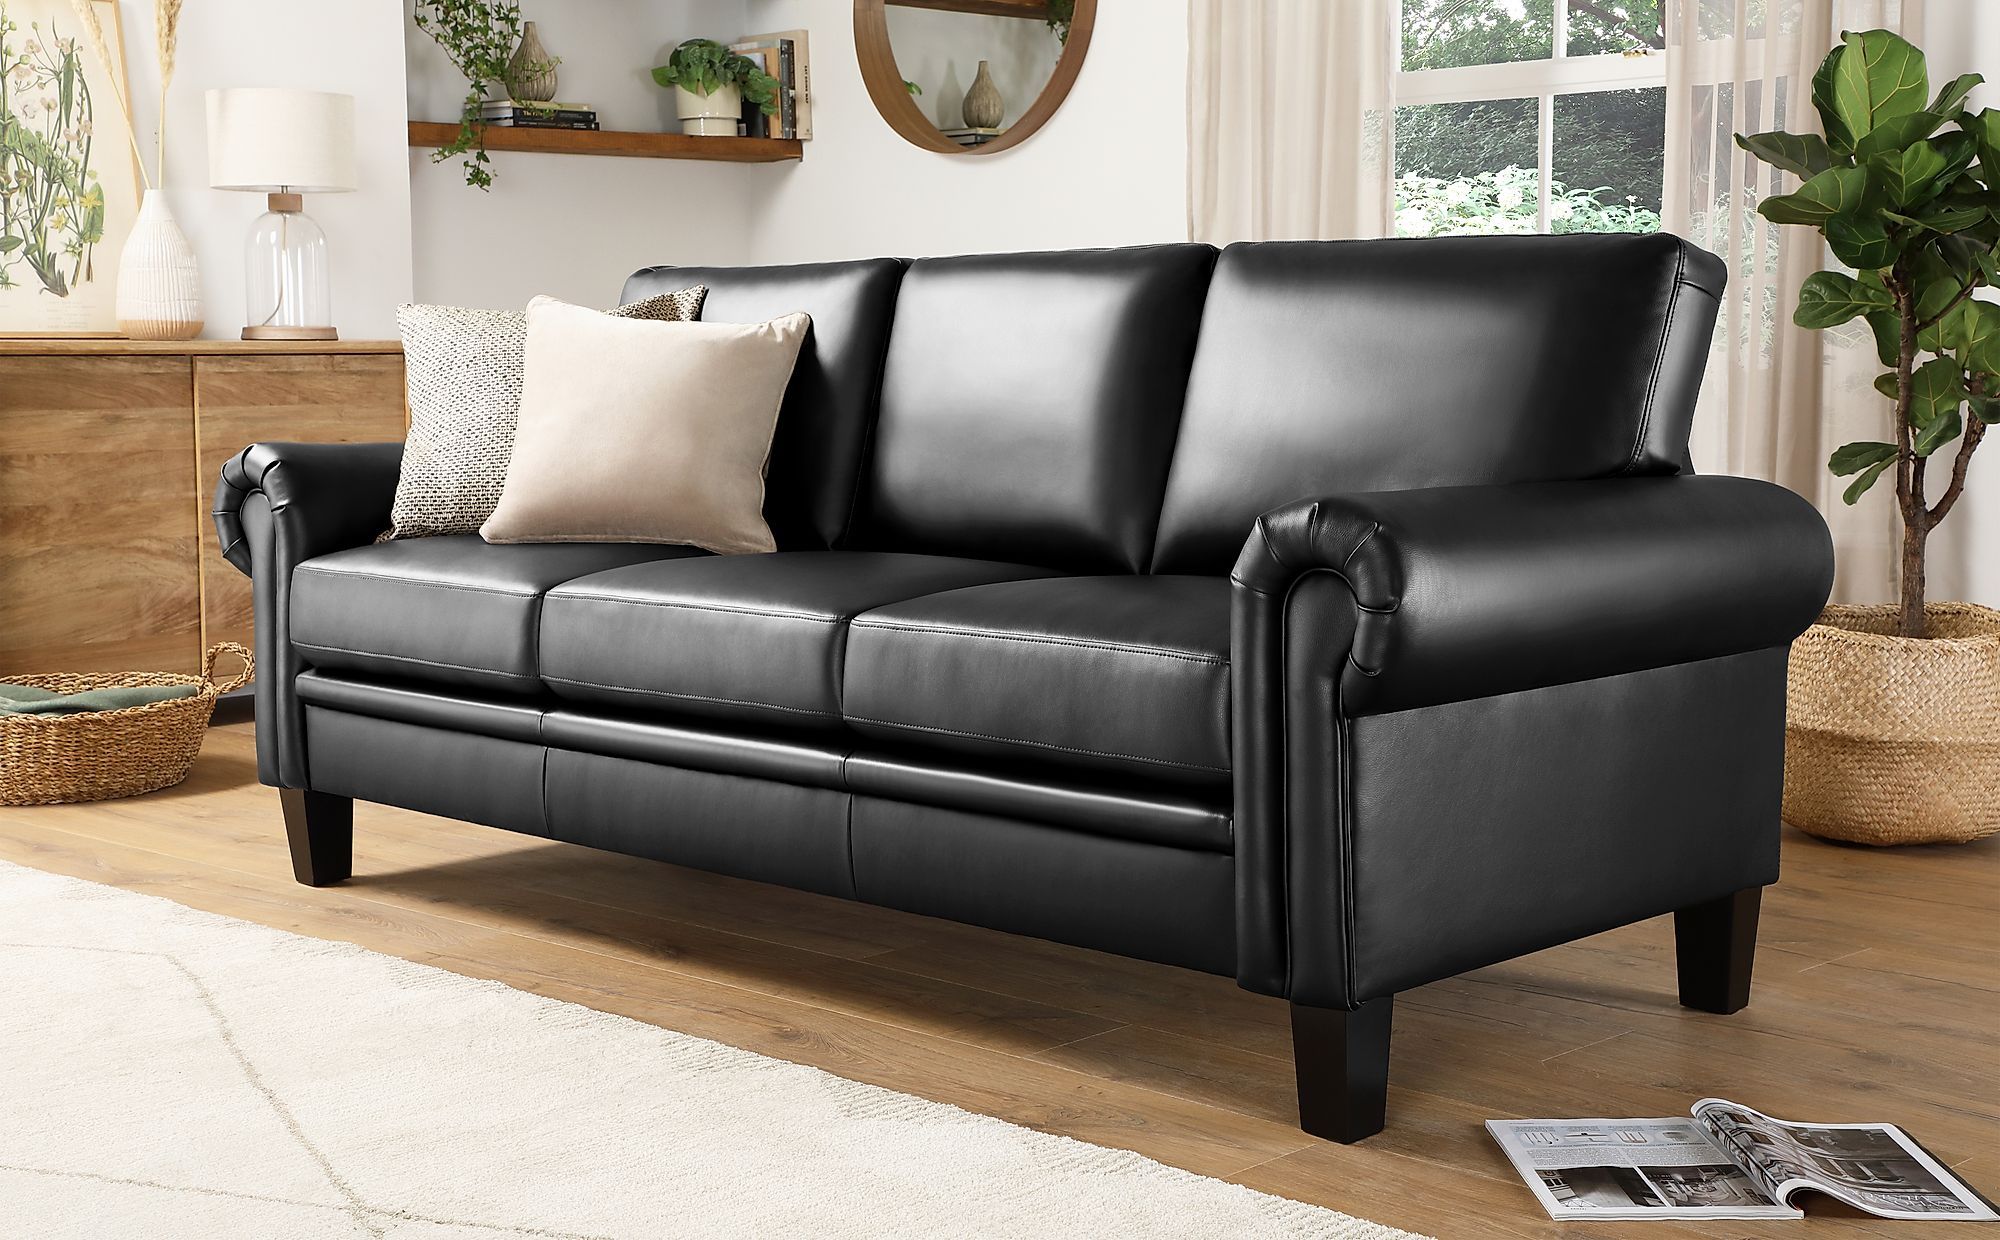 Oakley Black Leather 3 Seater Sofa | Furniture Choice Within 3 Seat L Shaped Sofas In Black (View 9 of 20)